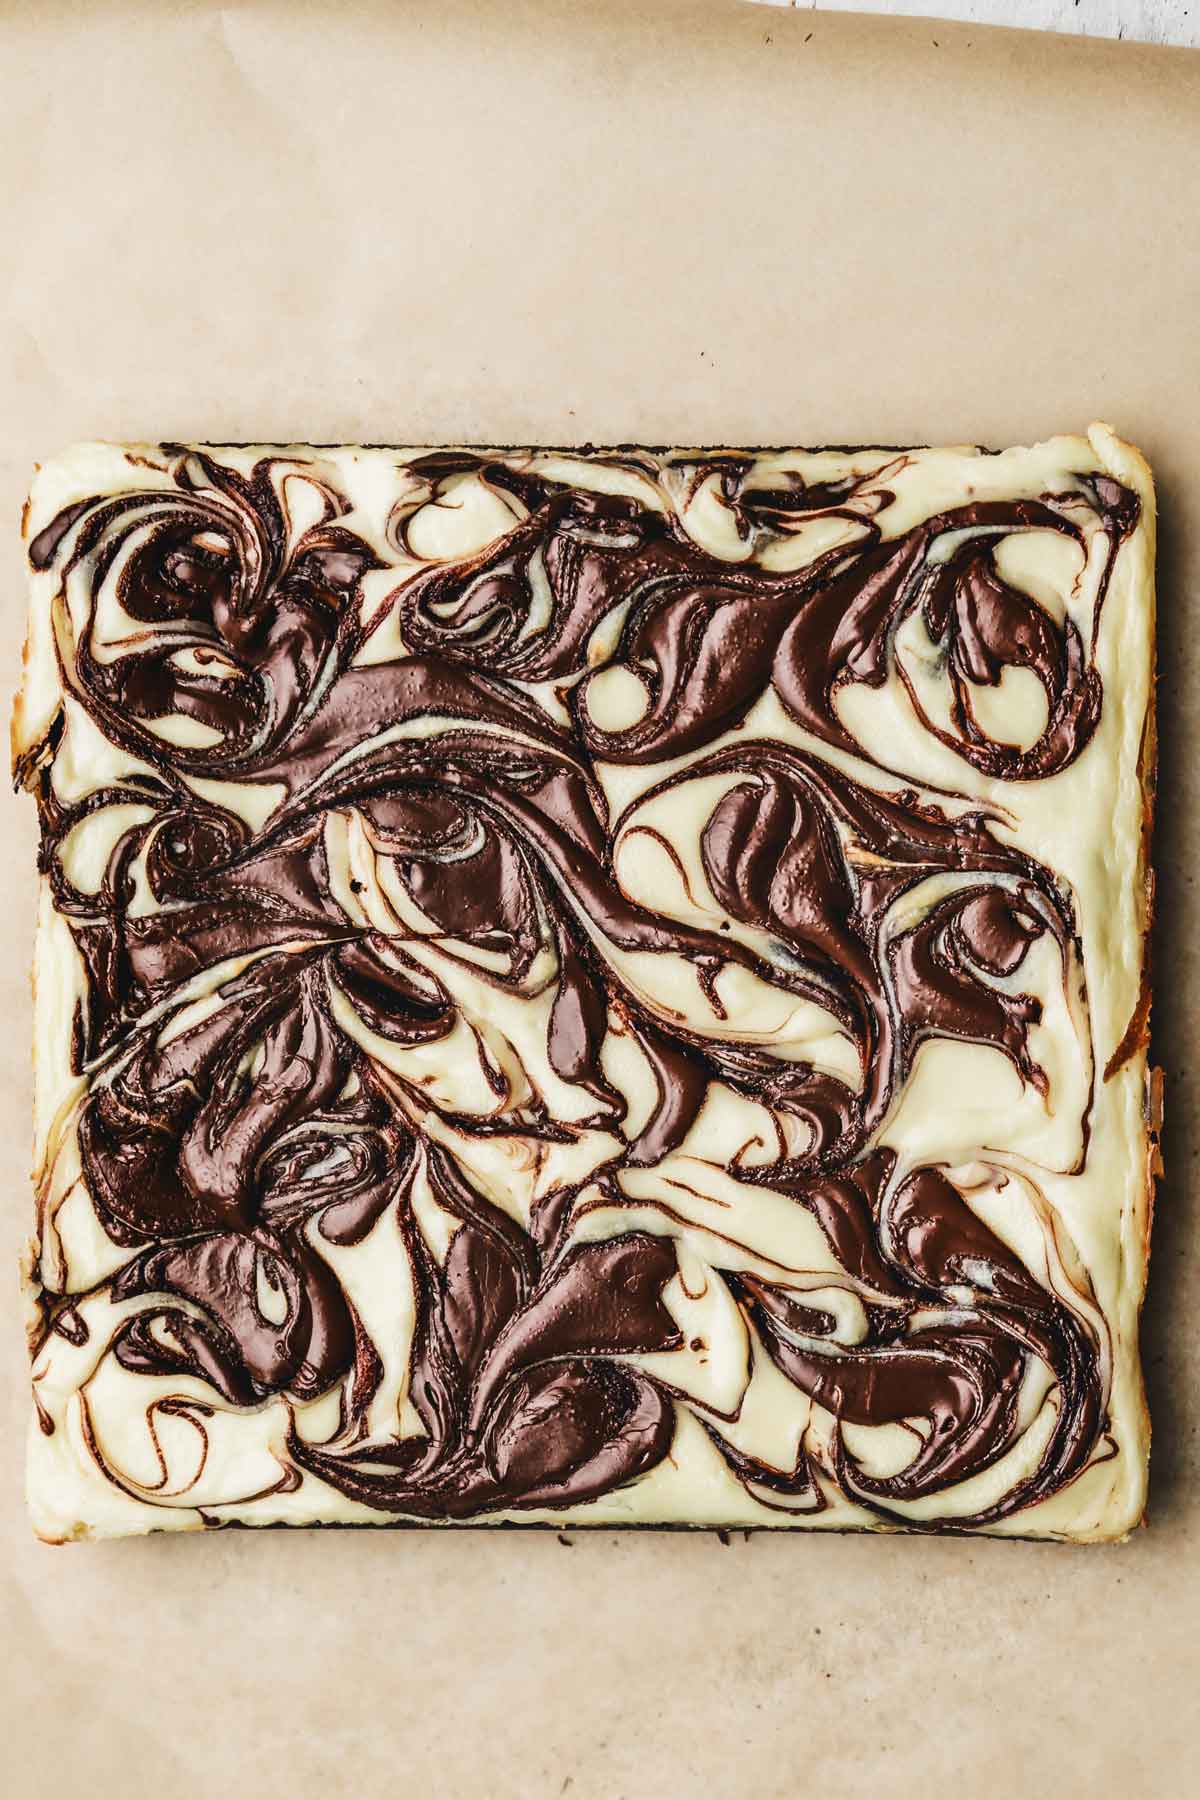 baked cheesecake brownies with nutella swirl